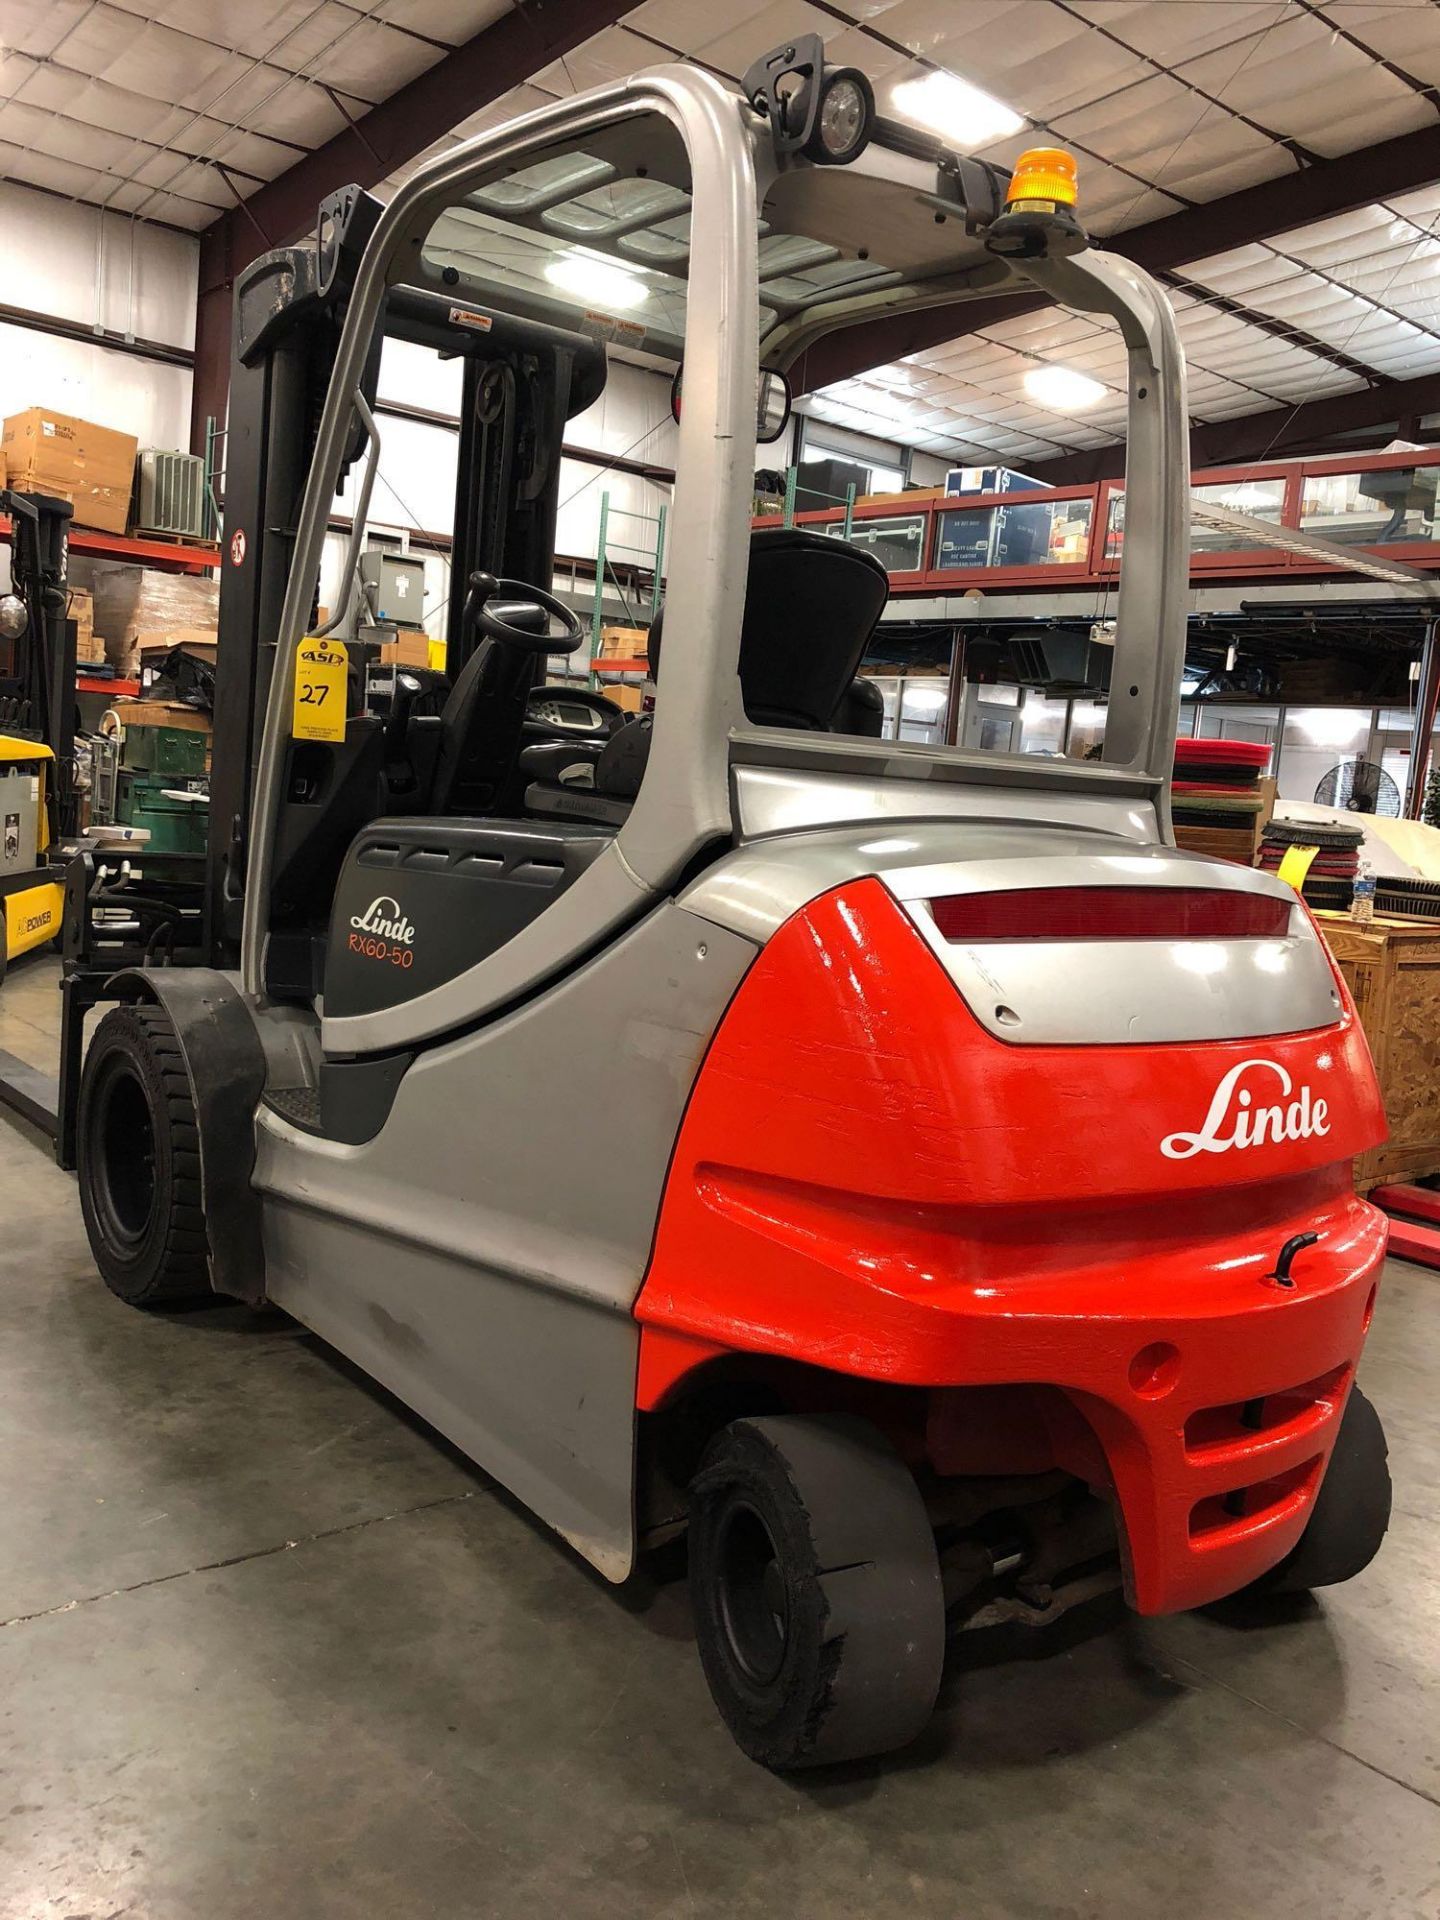 2009 LINDE ELECTRIC FORKLIFT MODEL RX60-50, 8,000 LB WEIGHT CAP - Image 7 of 11